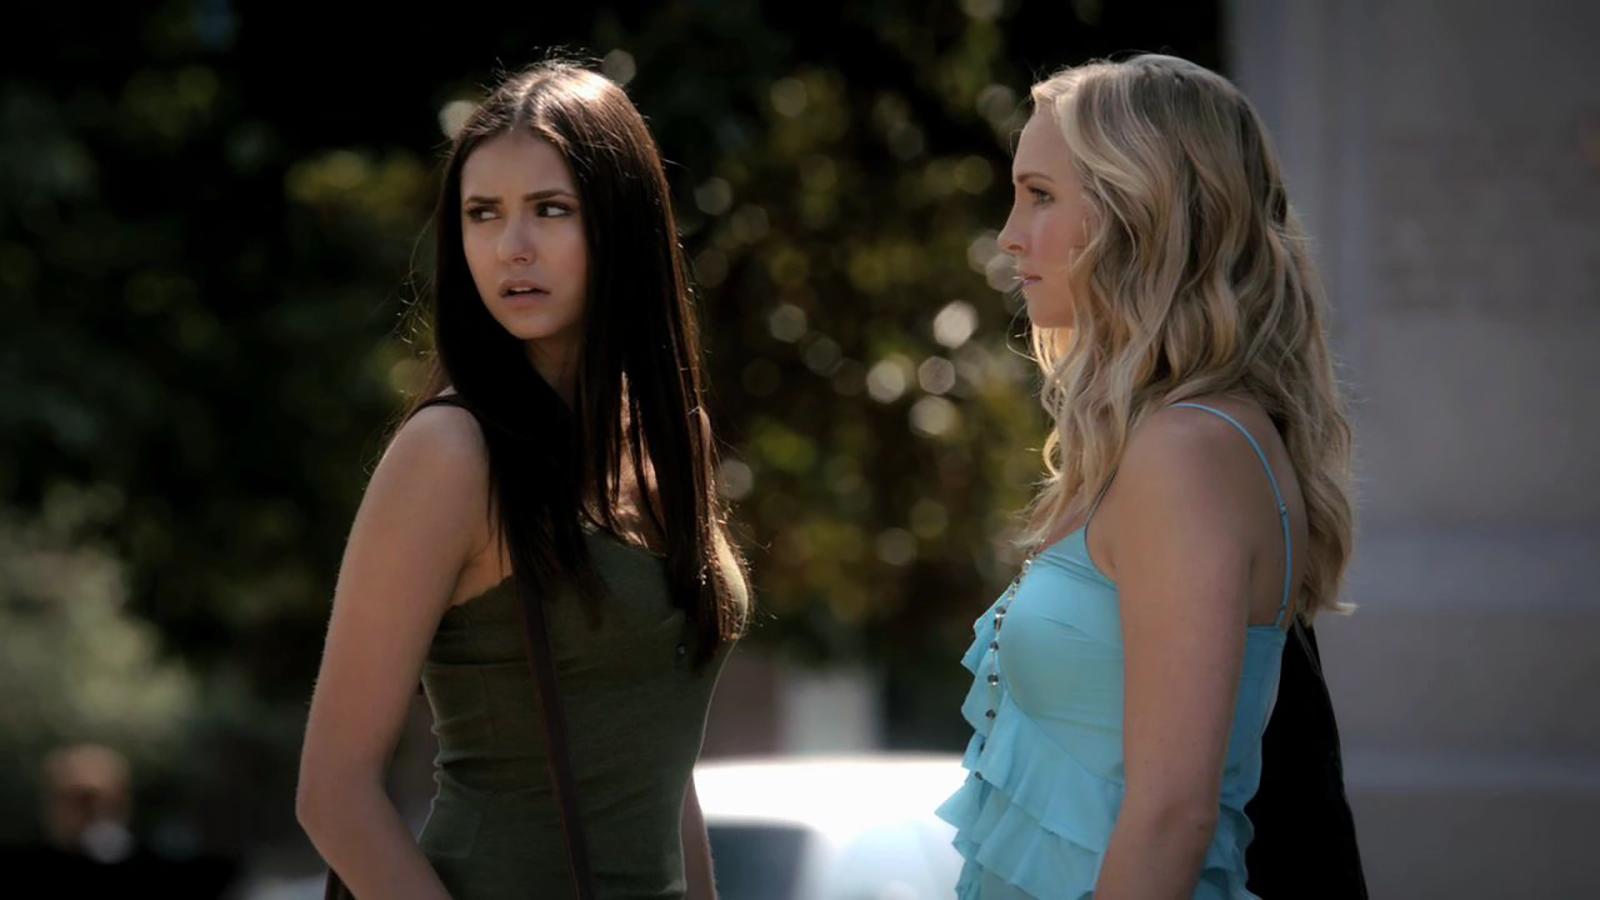 The Moment Vampire Diaries Went Downhill (And Never Recovered) - image 1